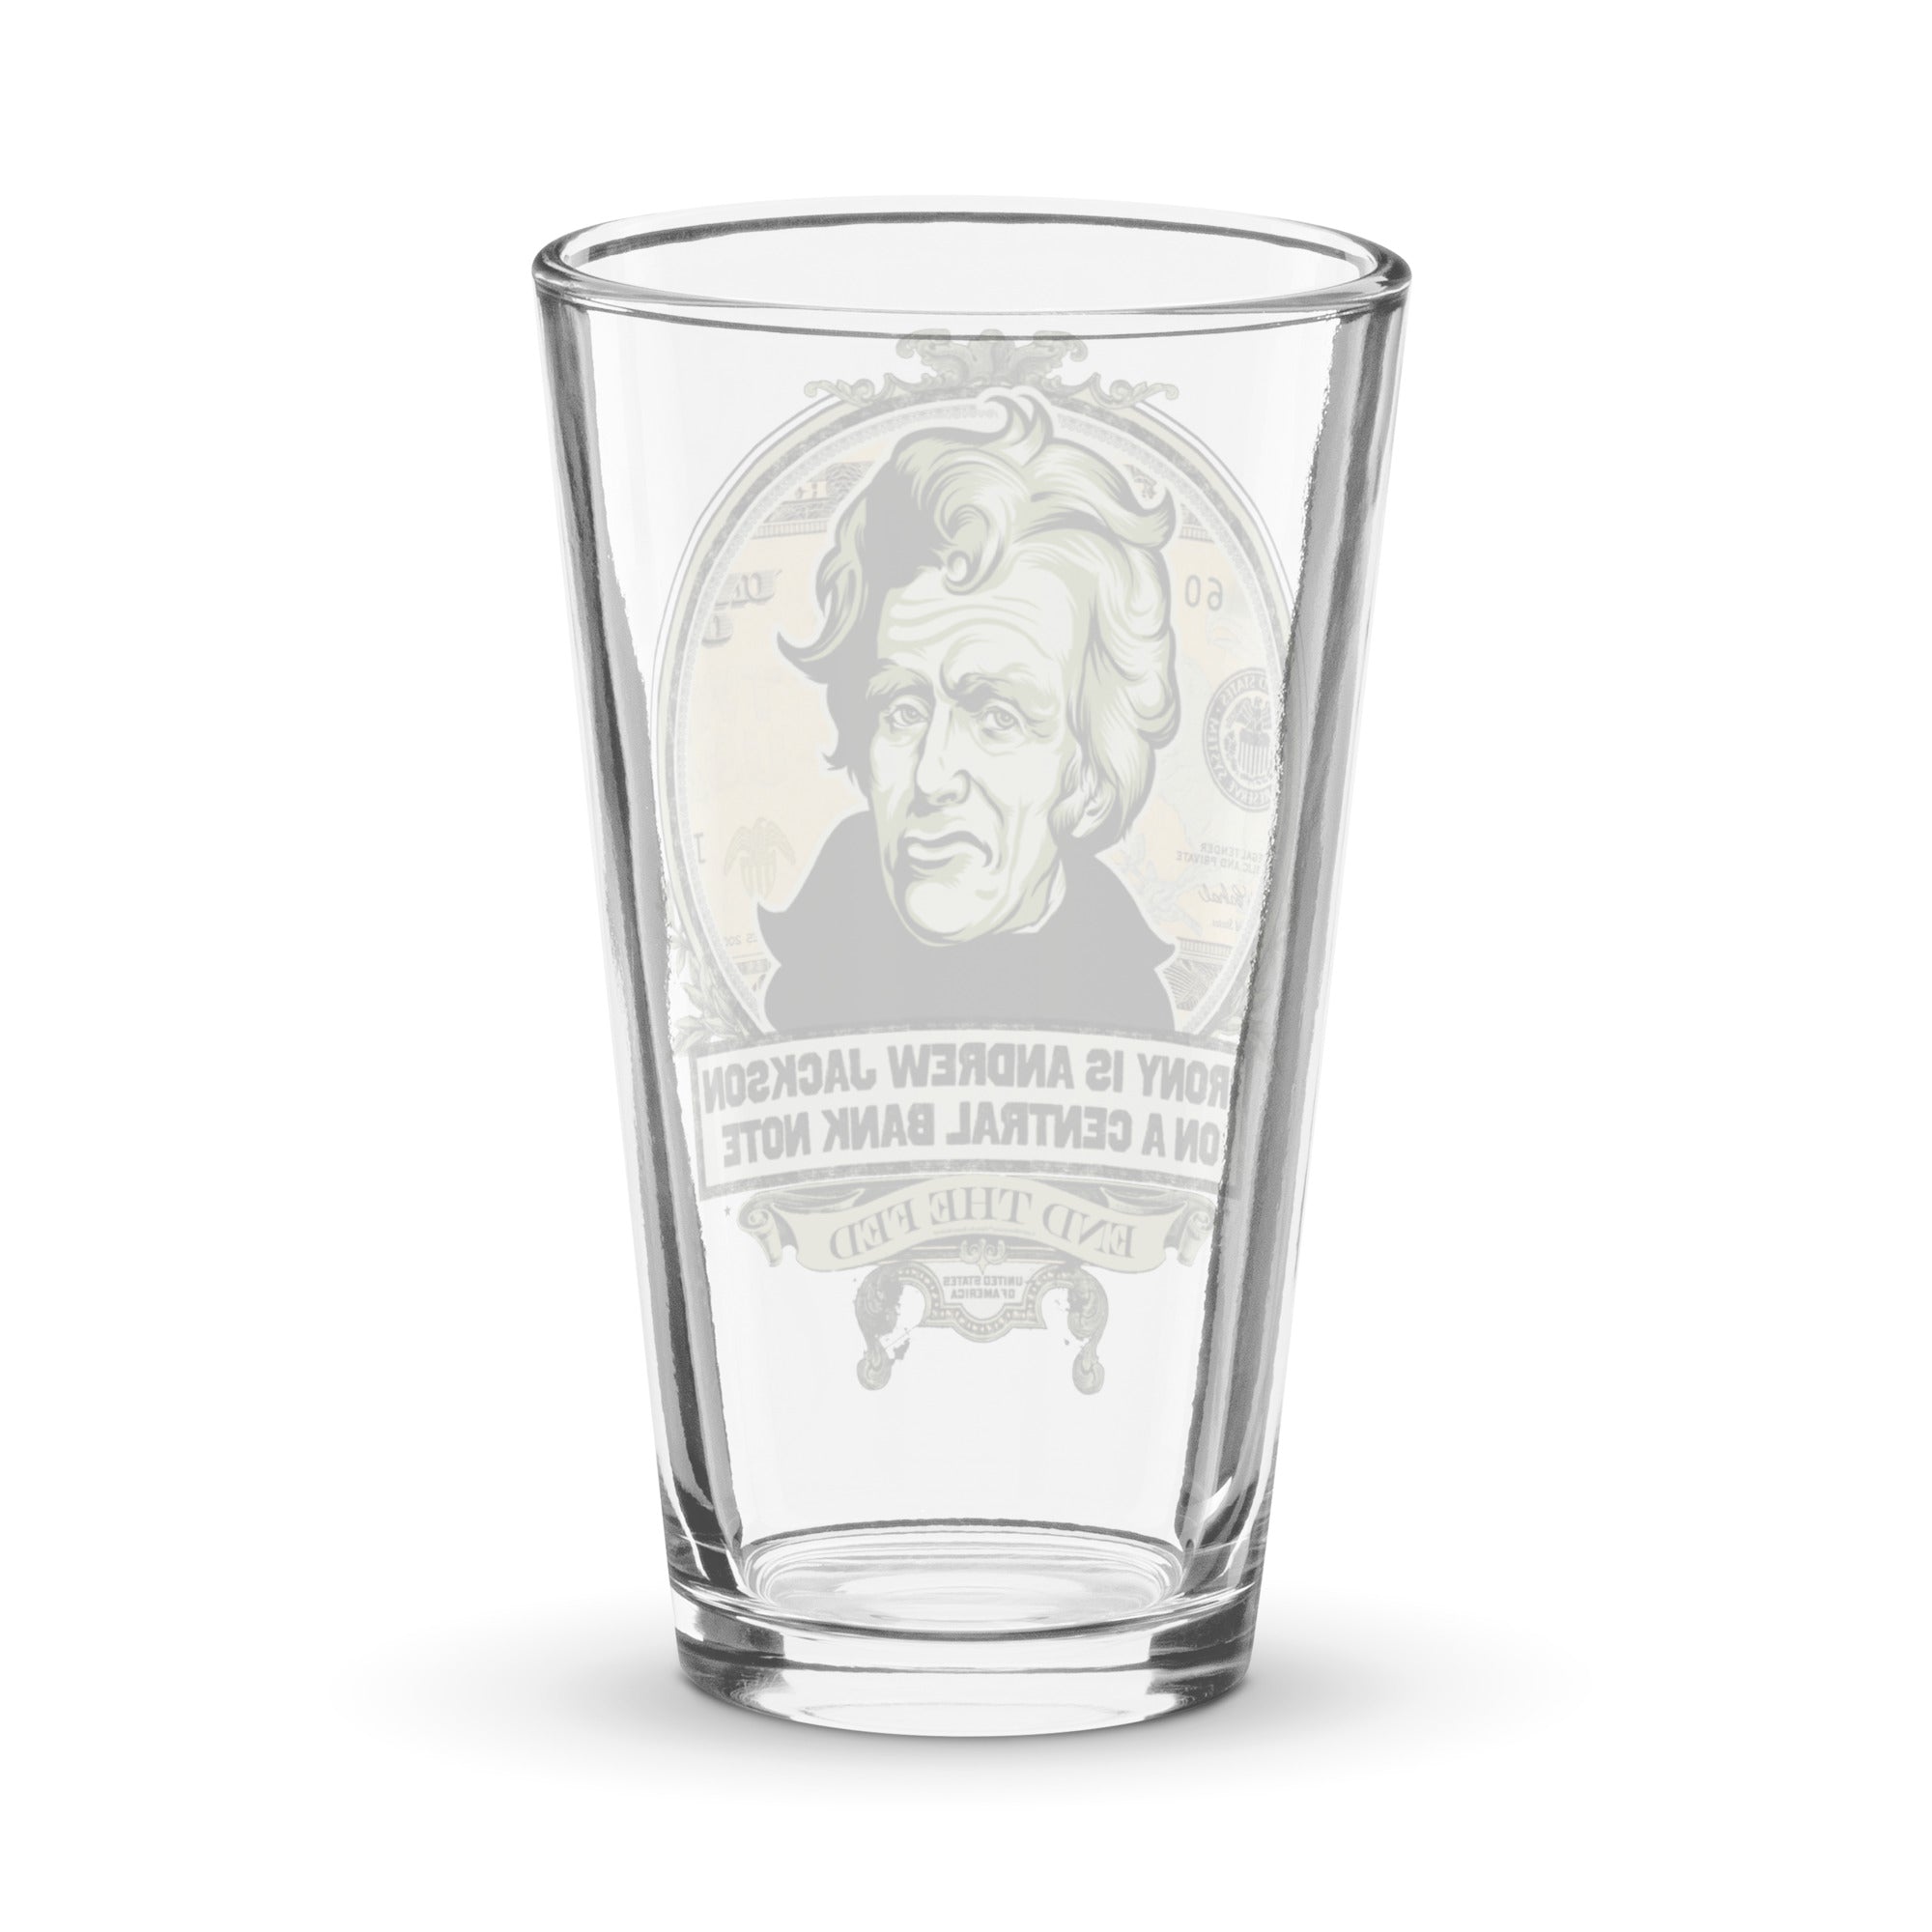 Irony is Andrew Jackson on a Central Bank Note Shaker Pint Glass